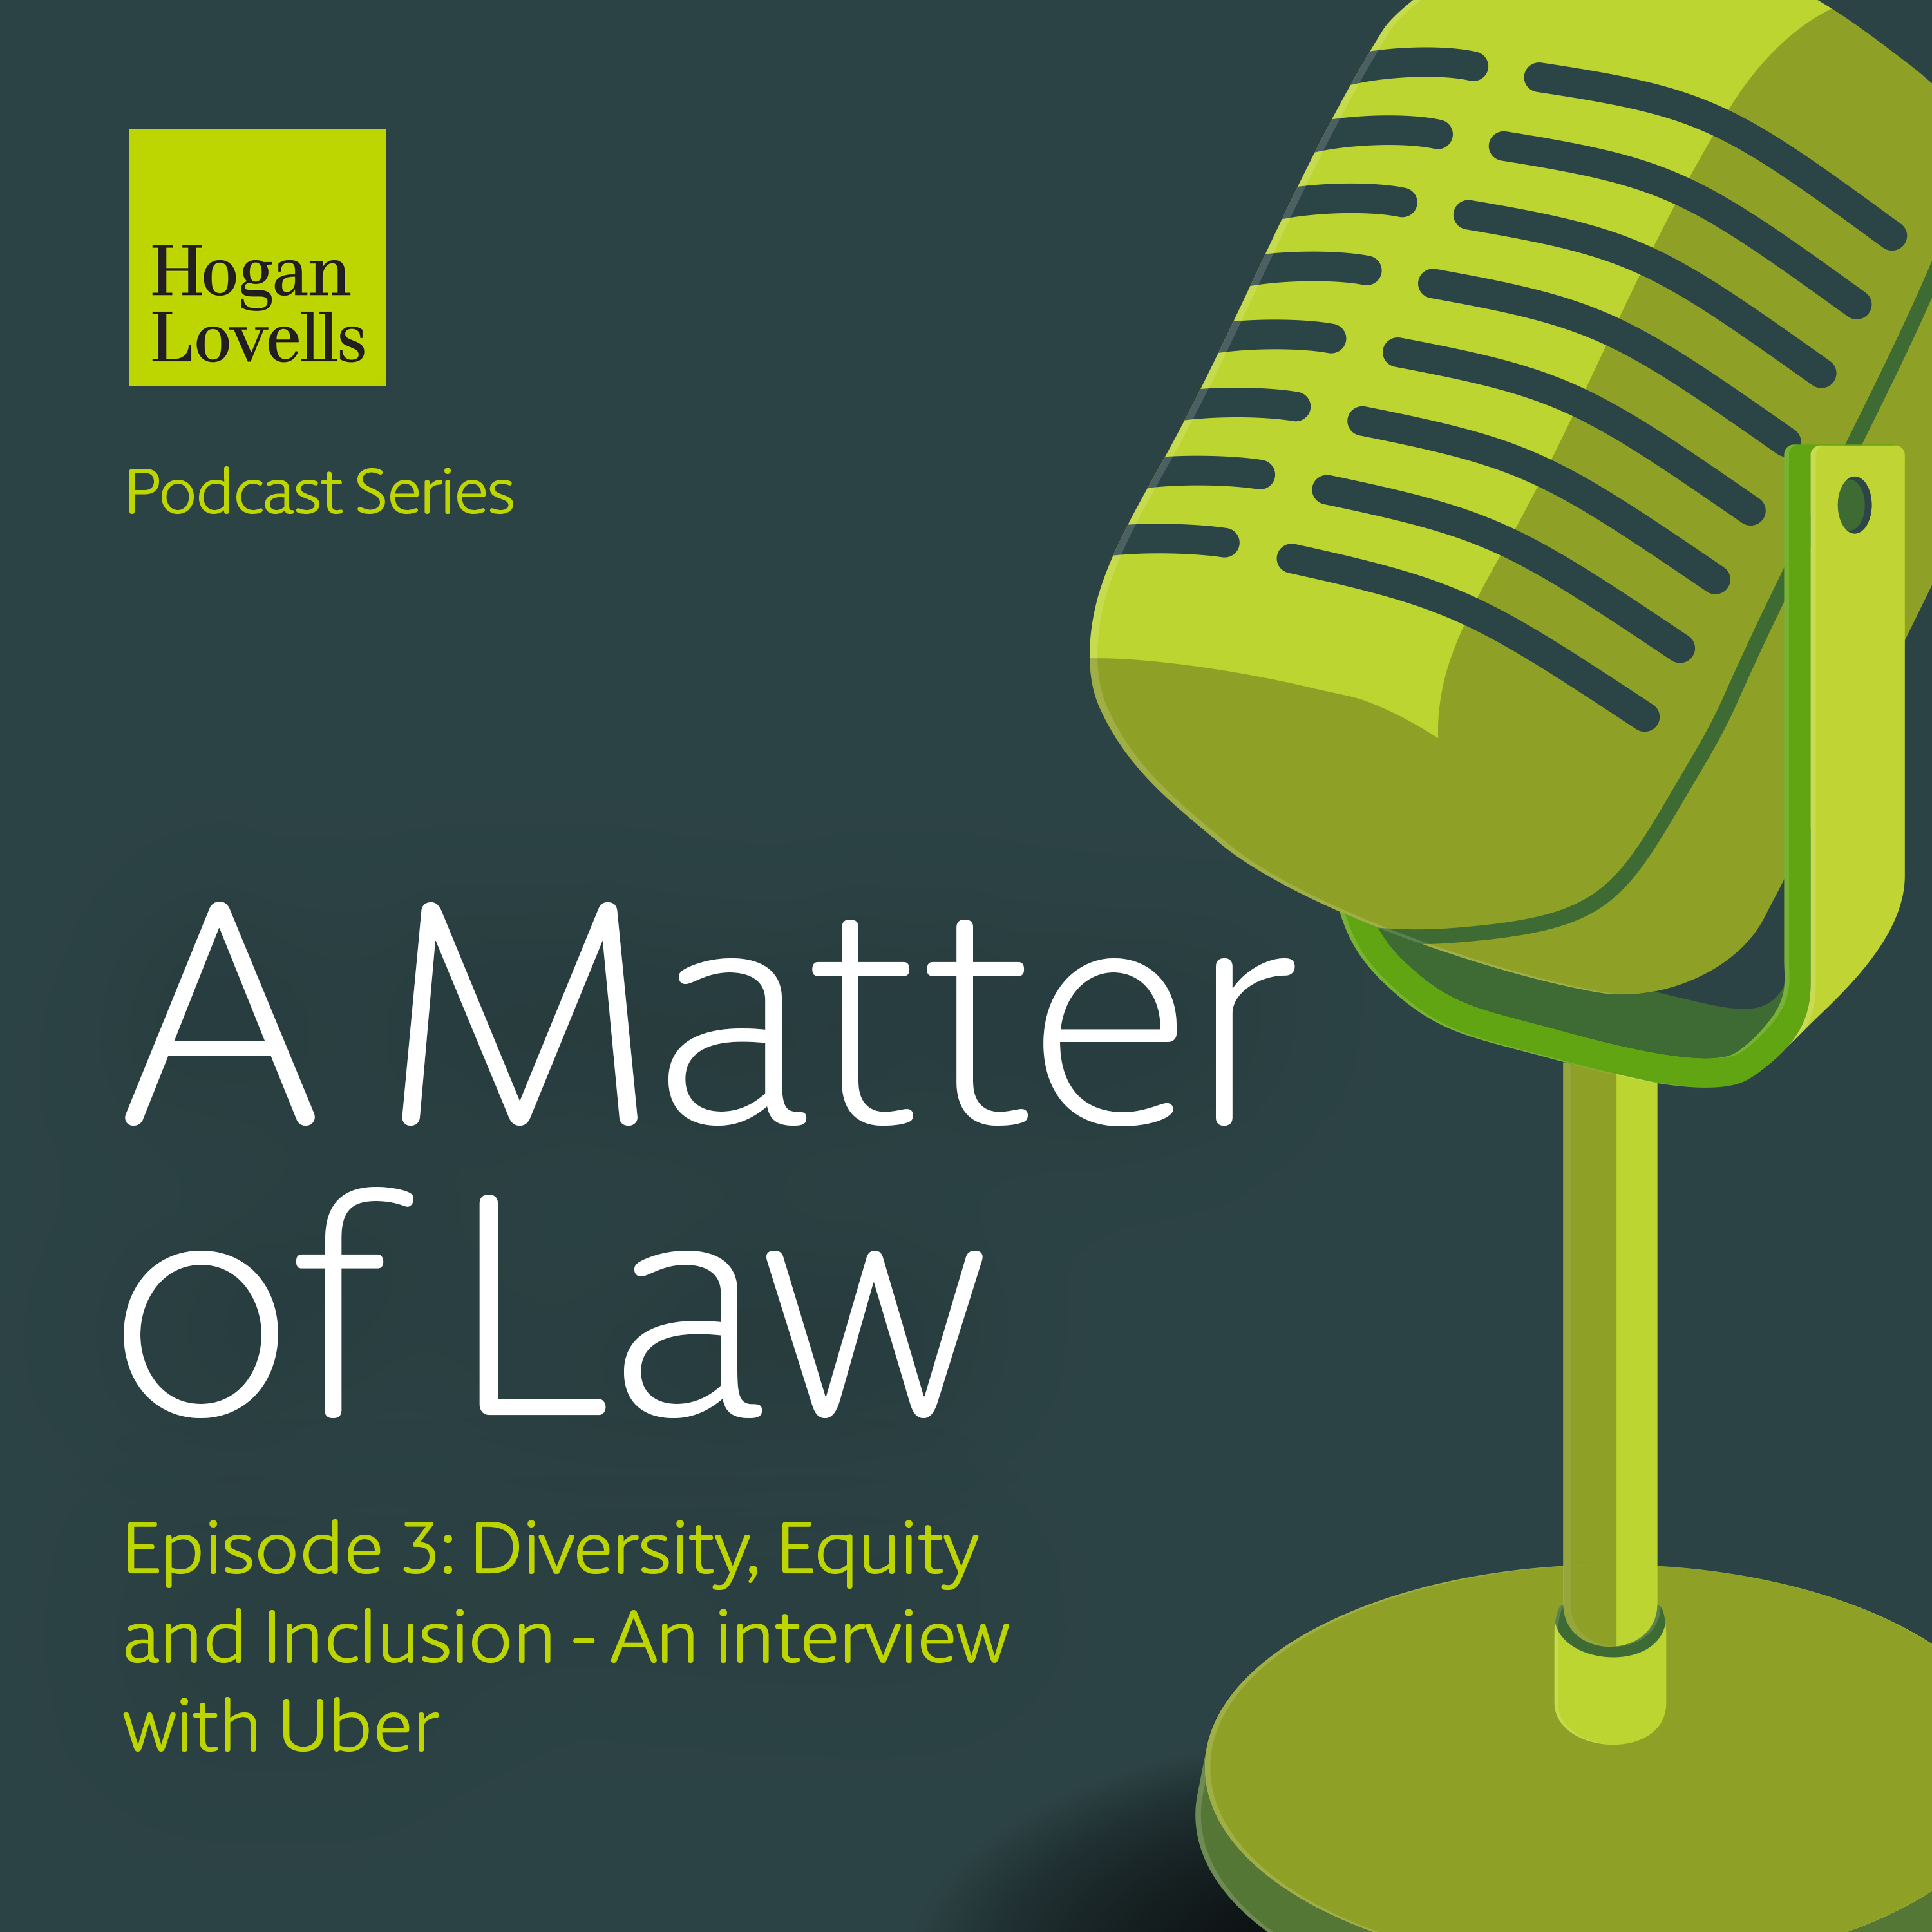 Diversity, Equity and Inclusion - An interview with Uber